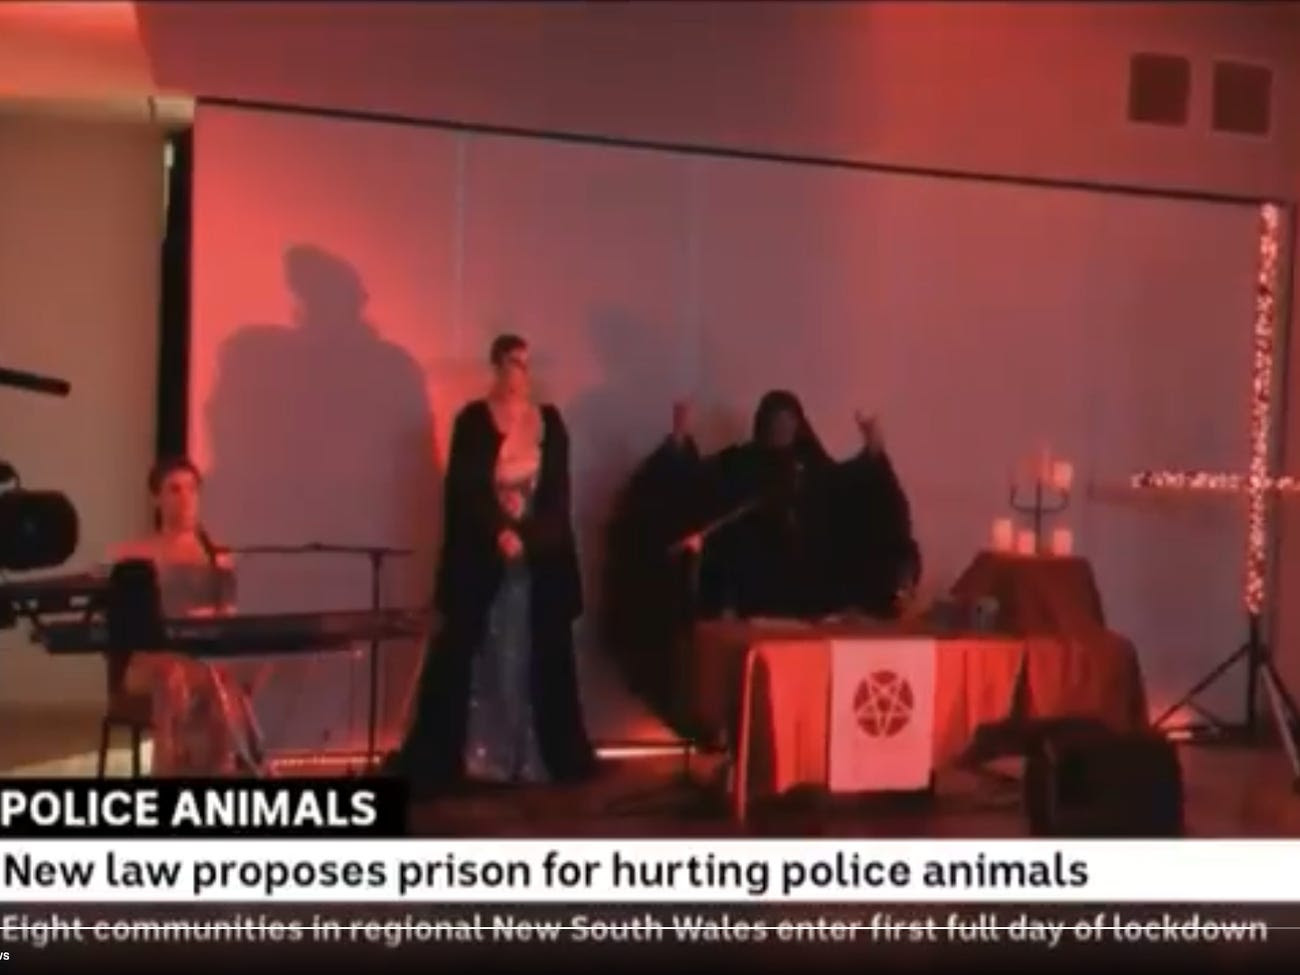 Satanic ritual accidentally included in broadcast on police dog welfare